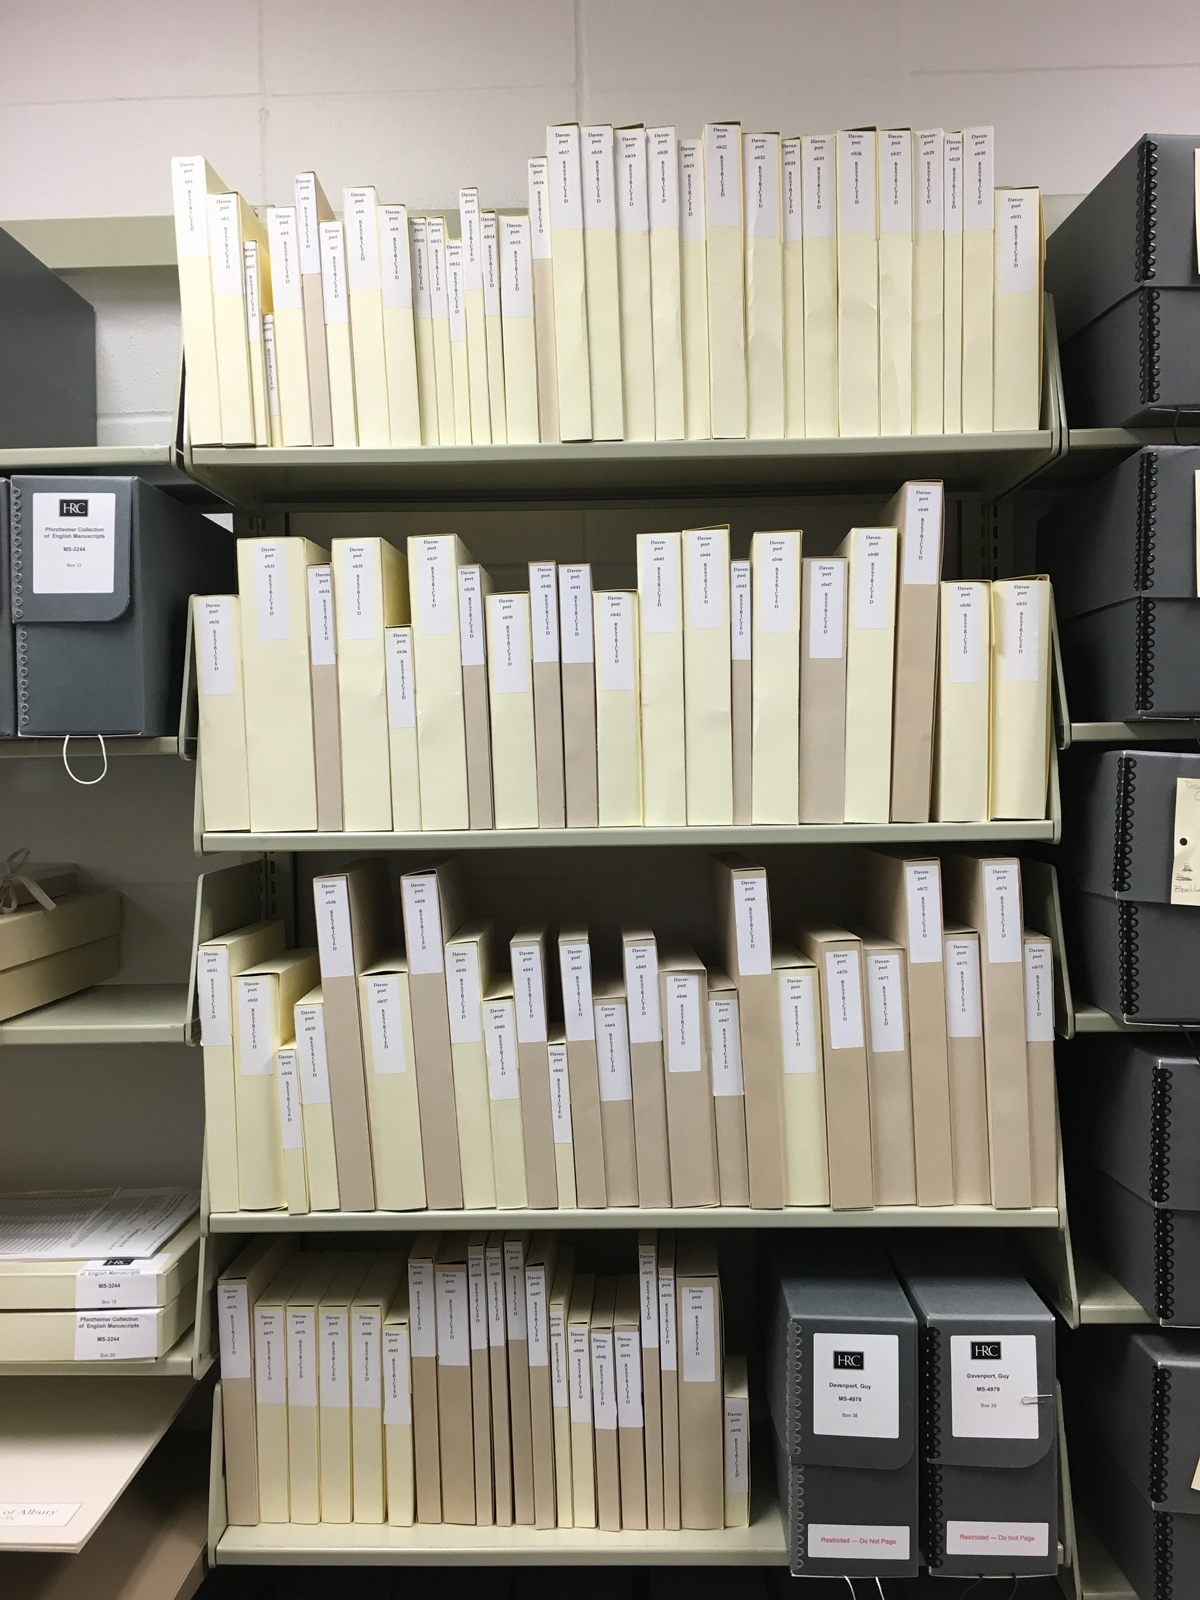 Guy Davenport's 95 journals housed in tux boxes. Photo by Alan Van Dyke.